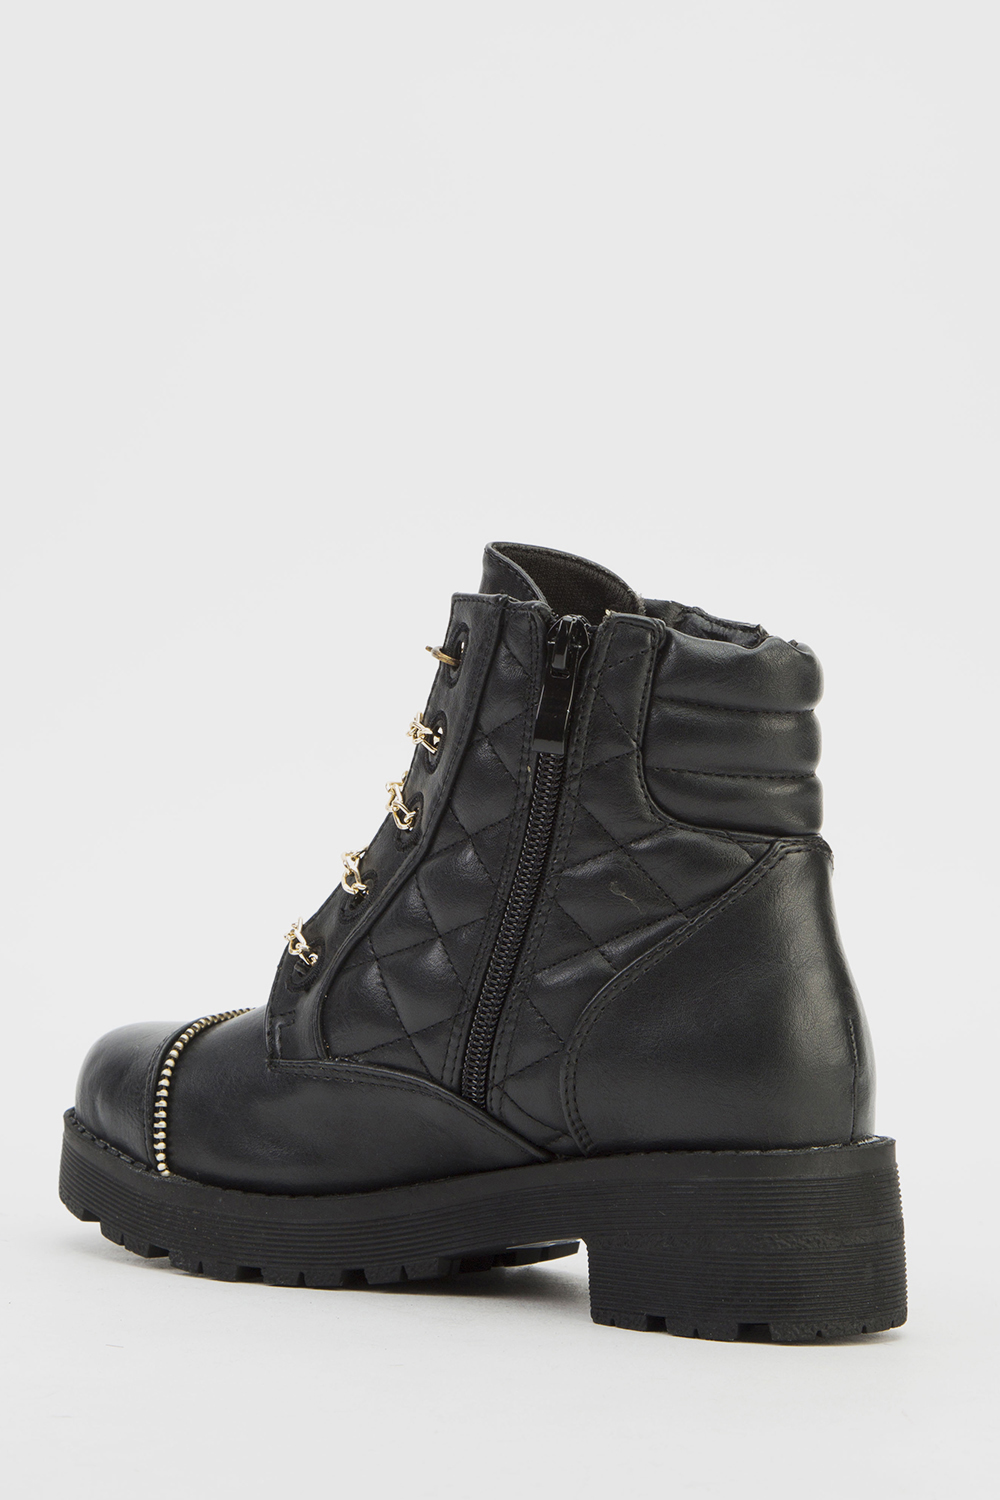 Chain Lace Up Biker Boots - Just $7